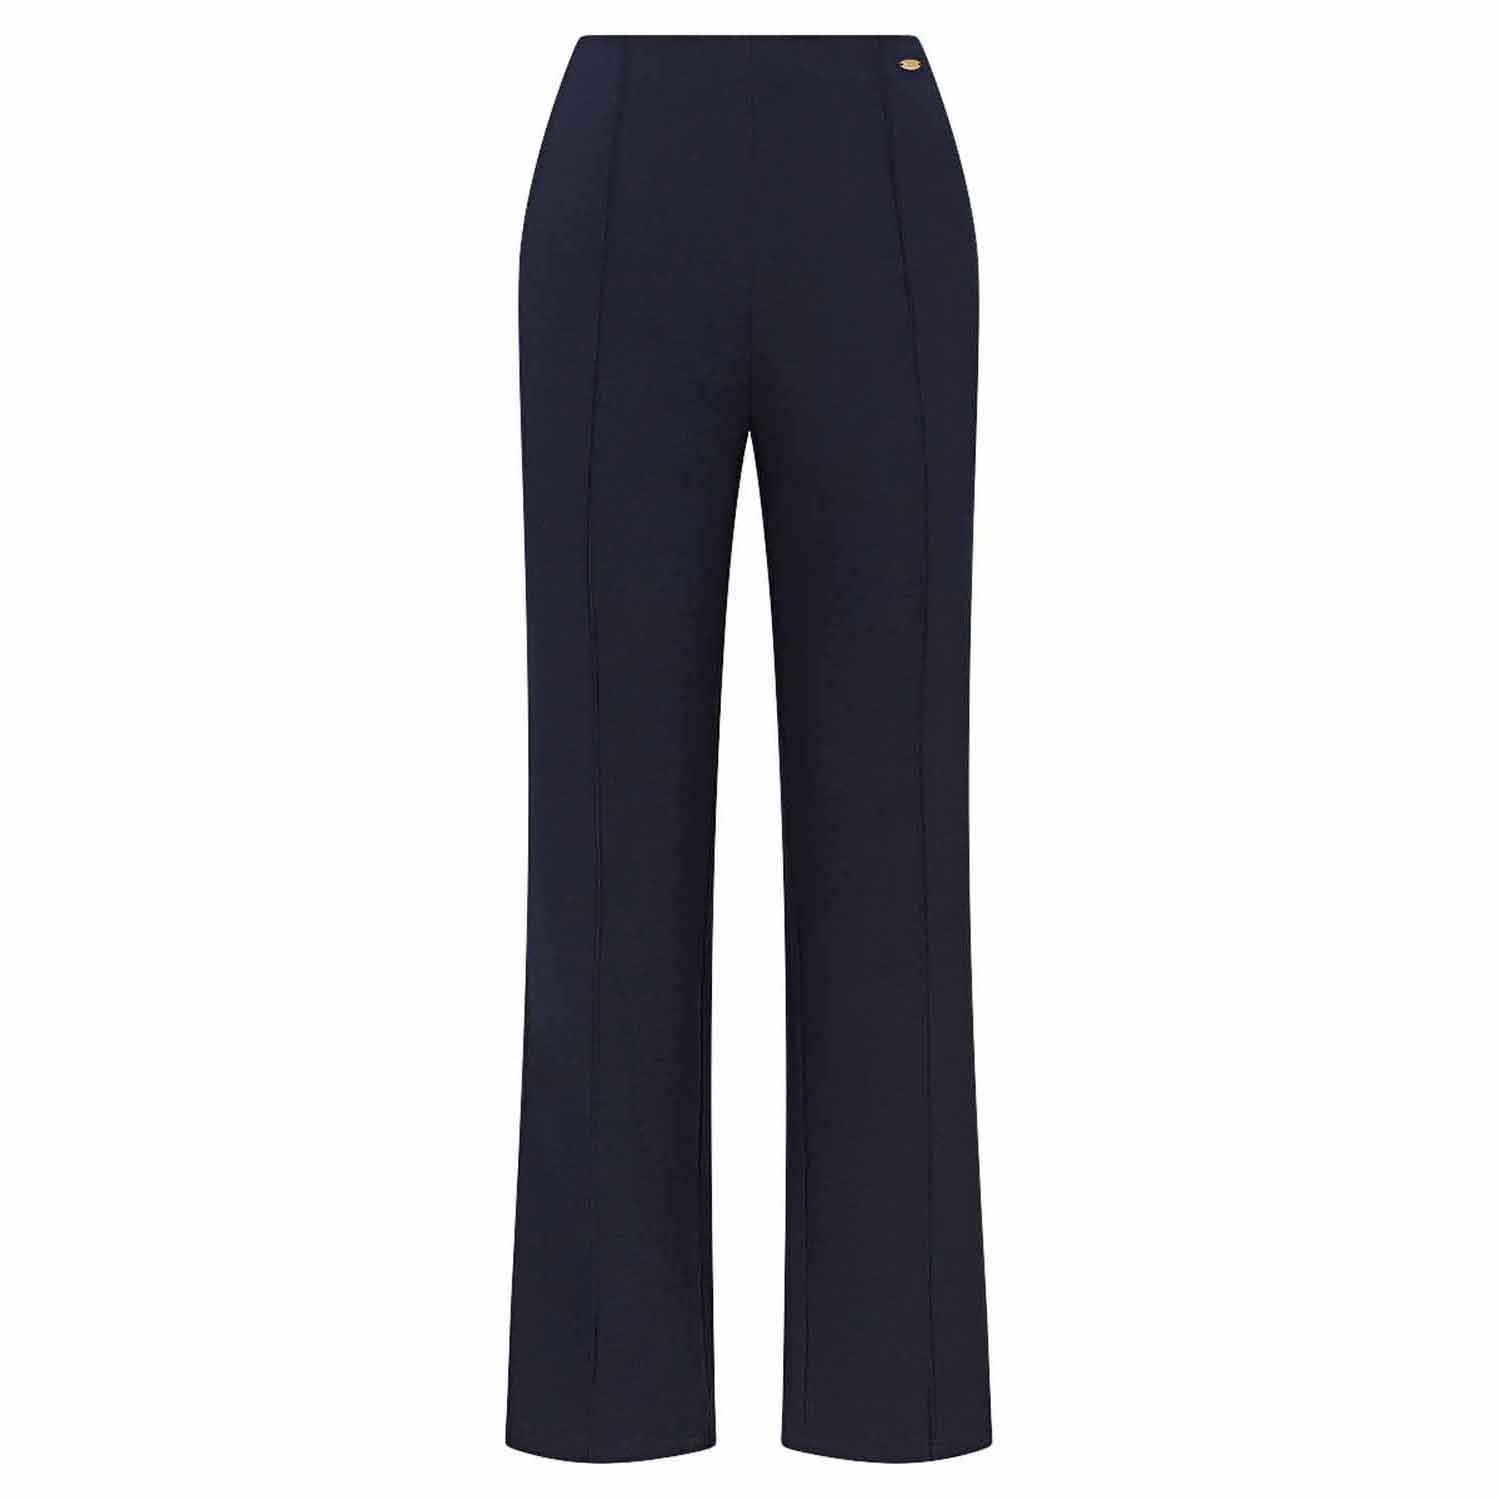 Tigiwear Jersey Light Weight Trousers - Navy 4 Shaws Department Stores